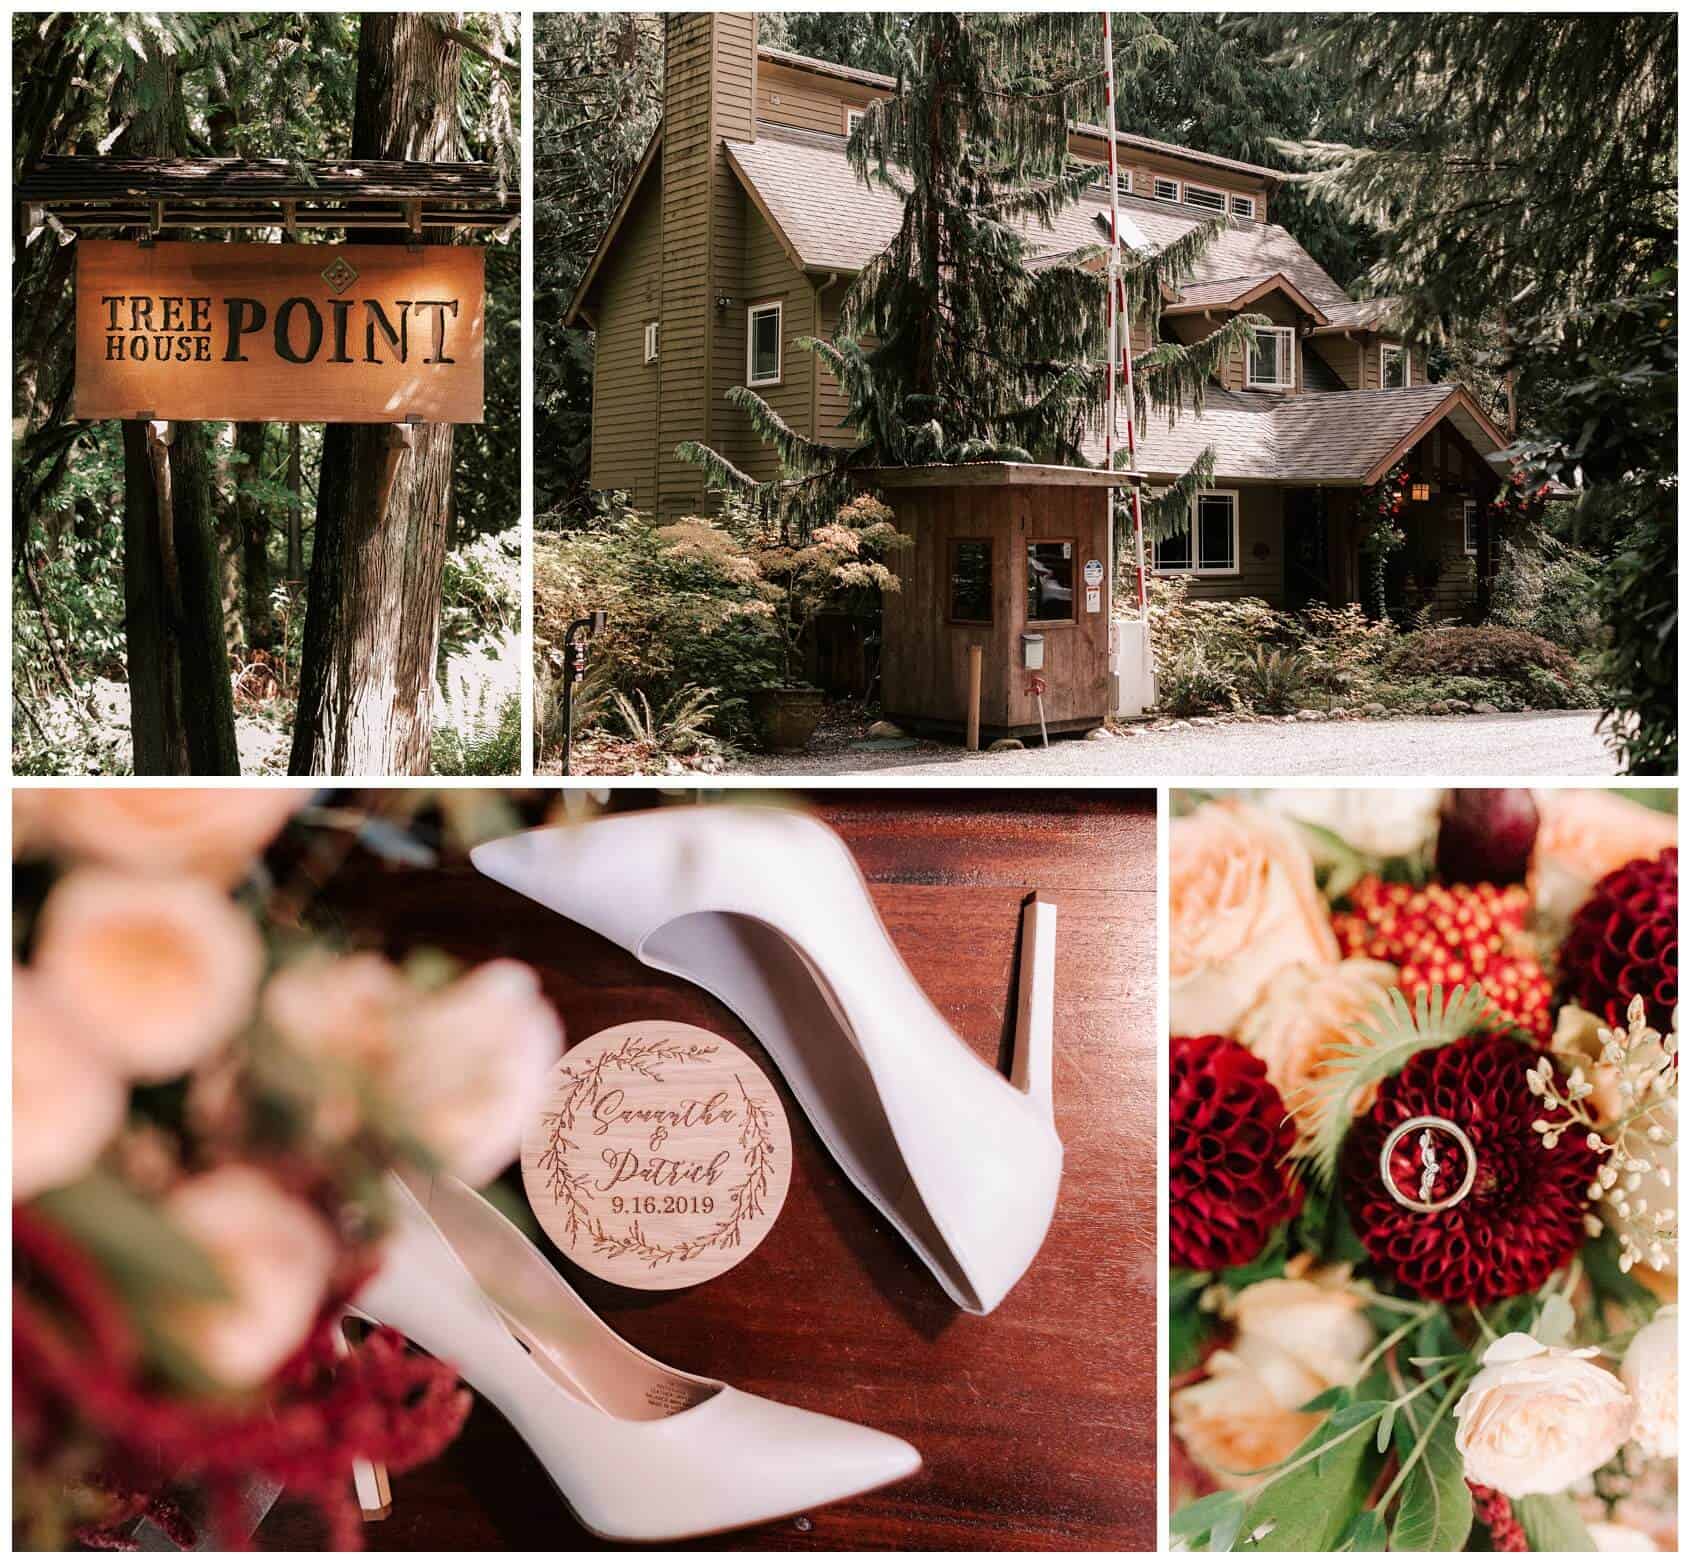 From Hawaii for their Treehouse Point wedding